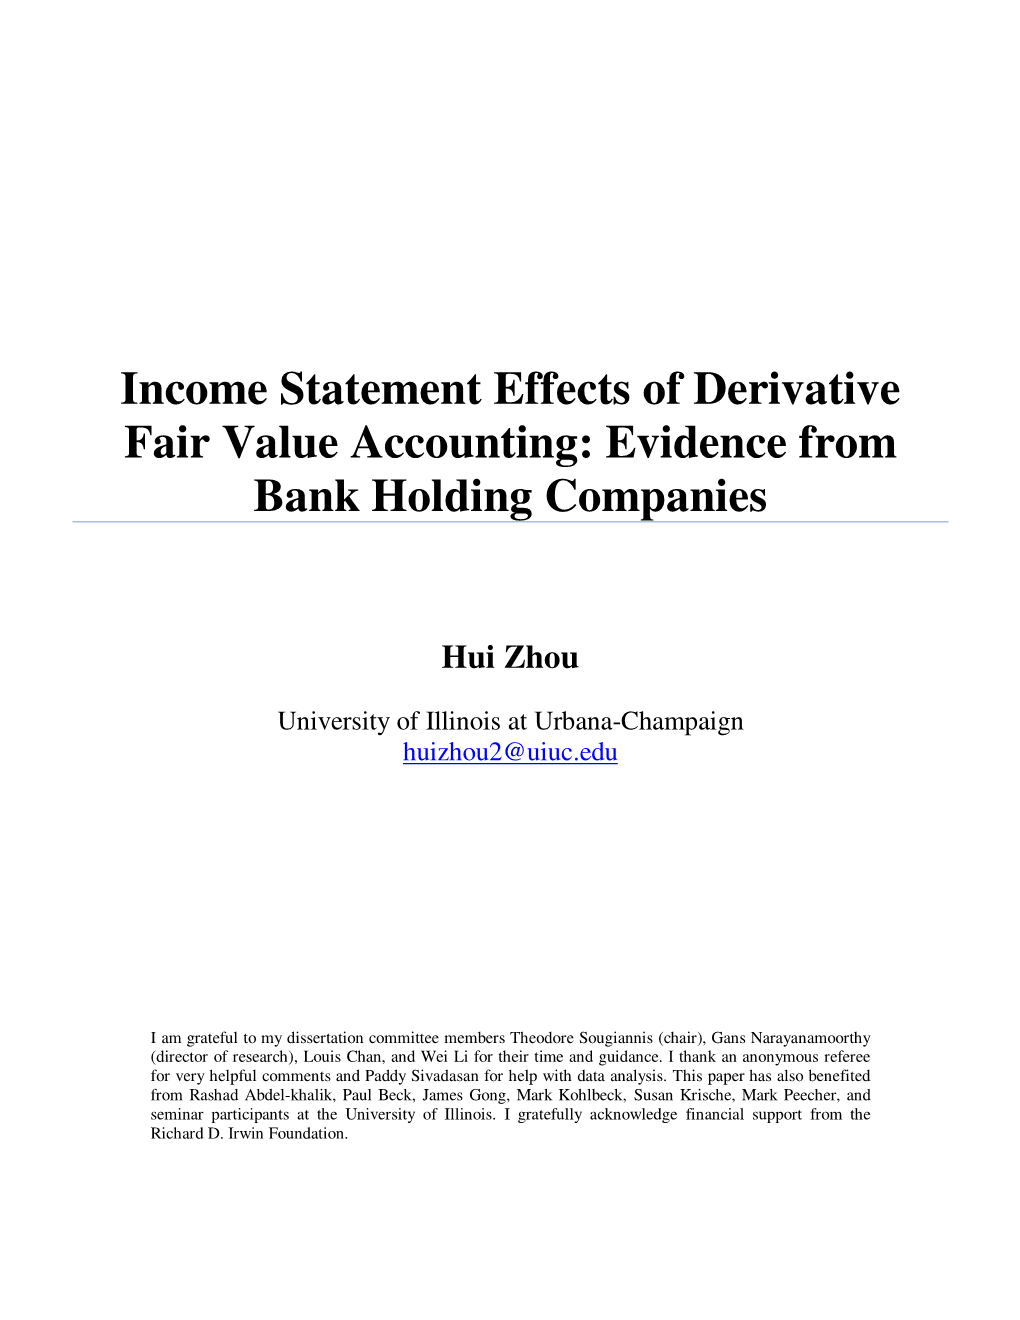 Income Statement Effects of Derivative Fair Value Accounting: Evidence from Bank Holding Companies